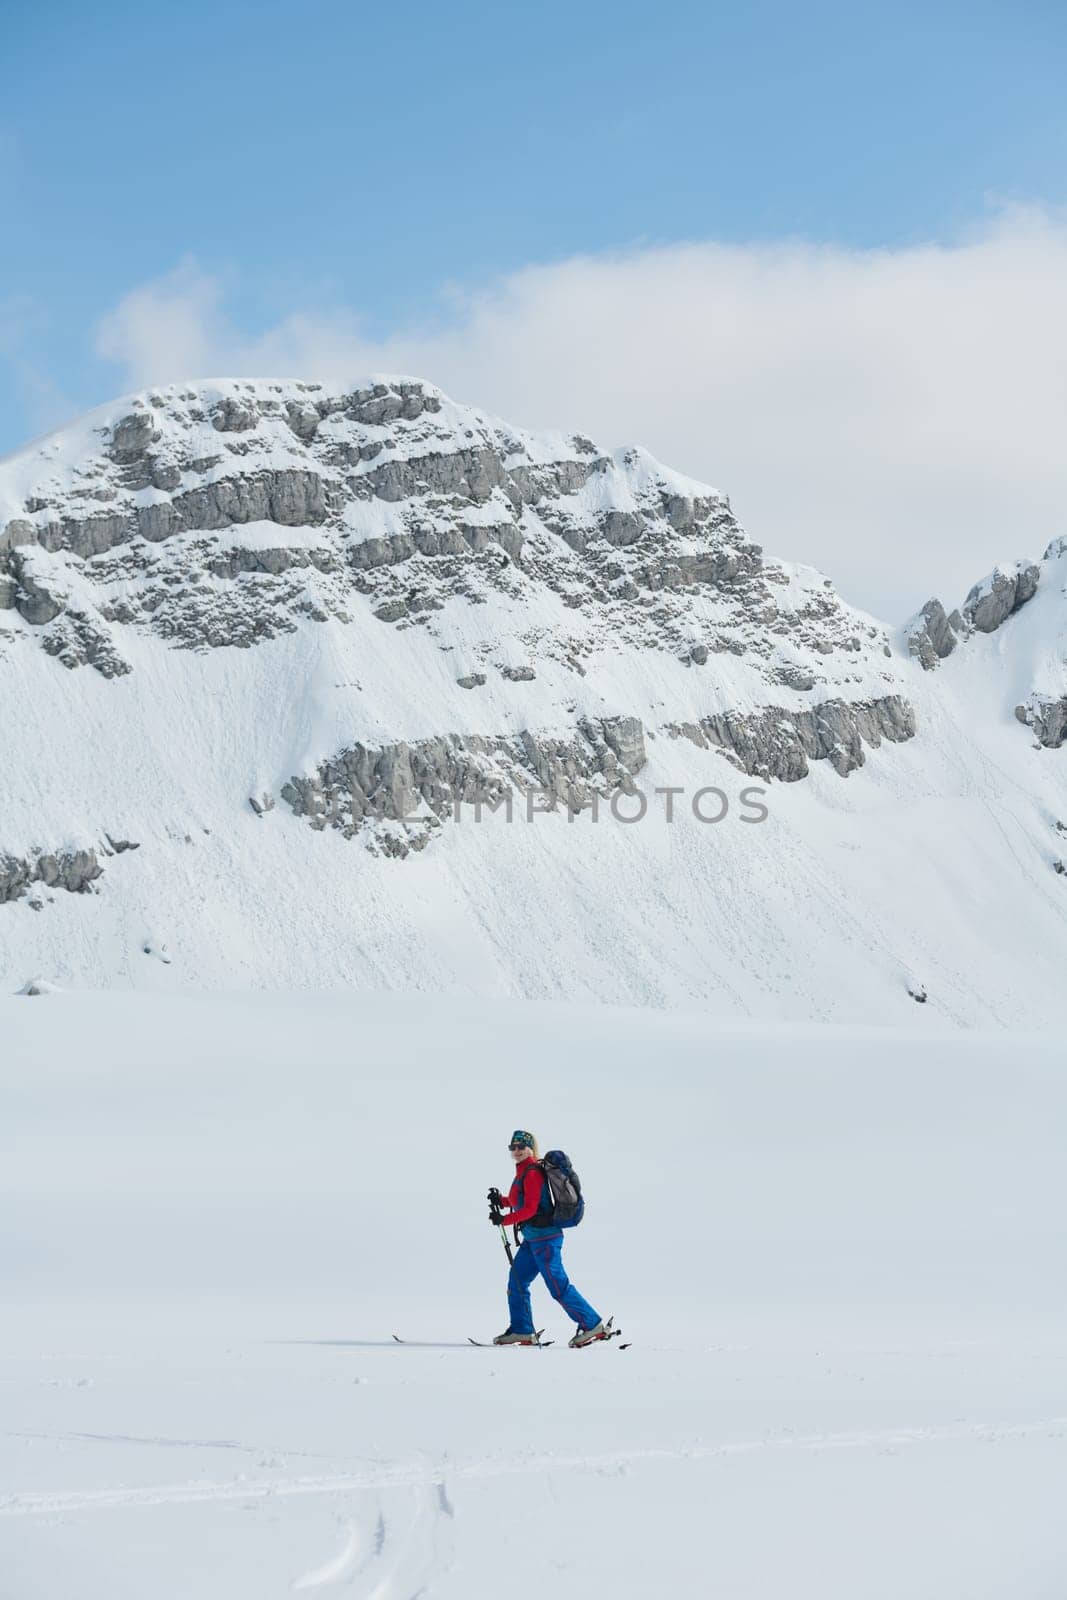 A female skier stands at the snowy summit of a mountain, equipped with professional gear and skis, poised for an exhilarating descent. by dotshock